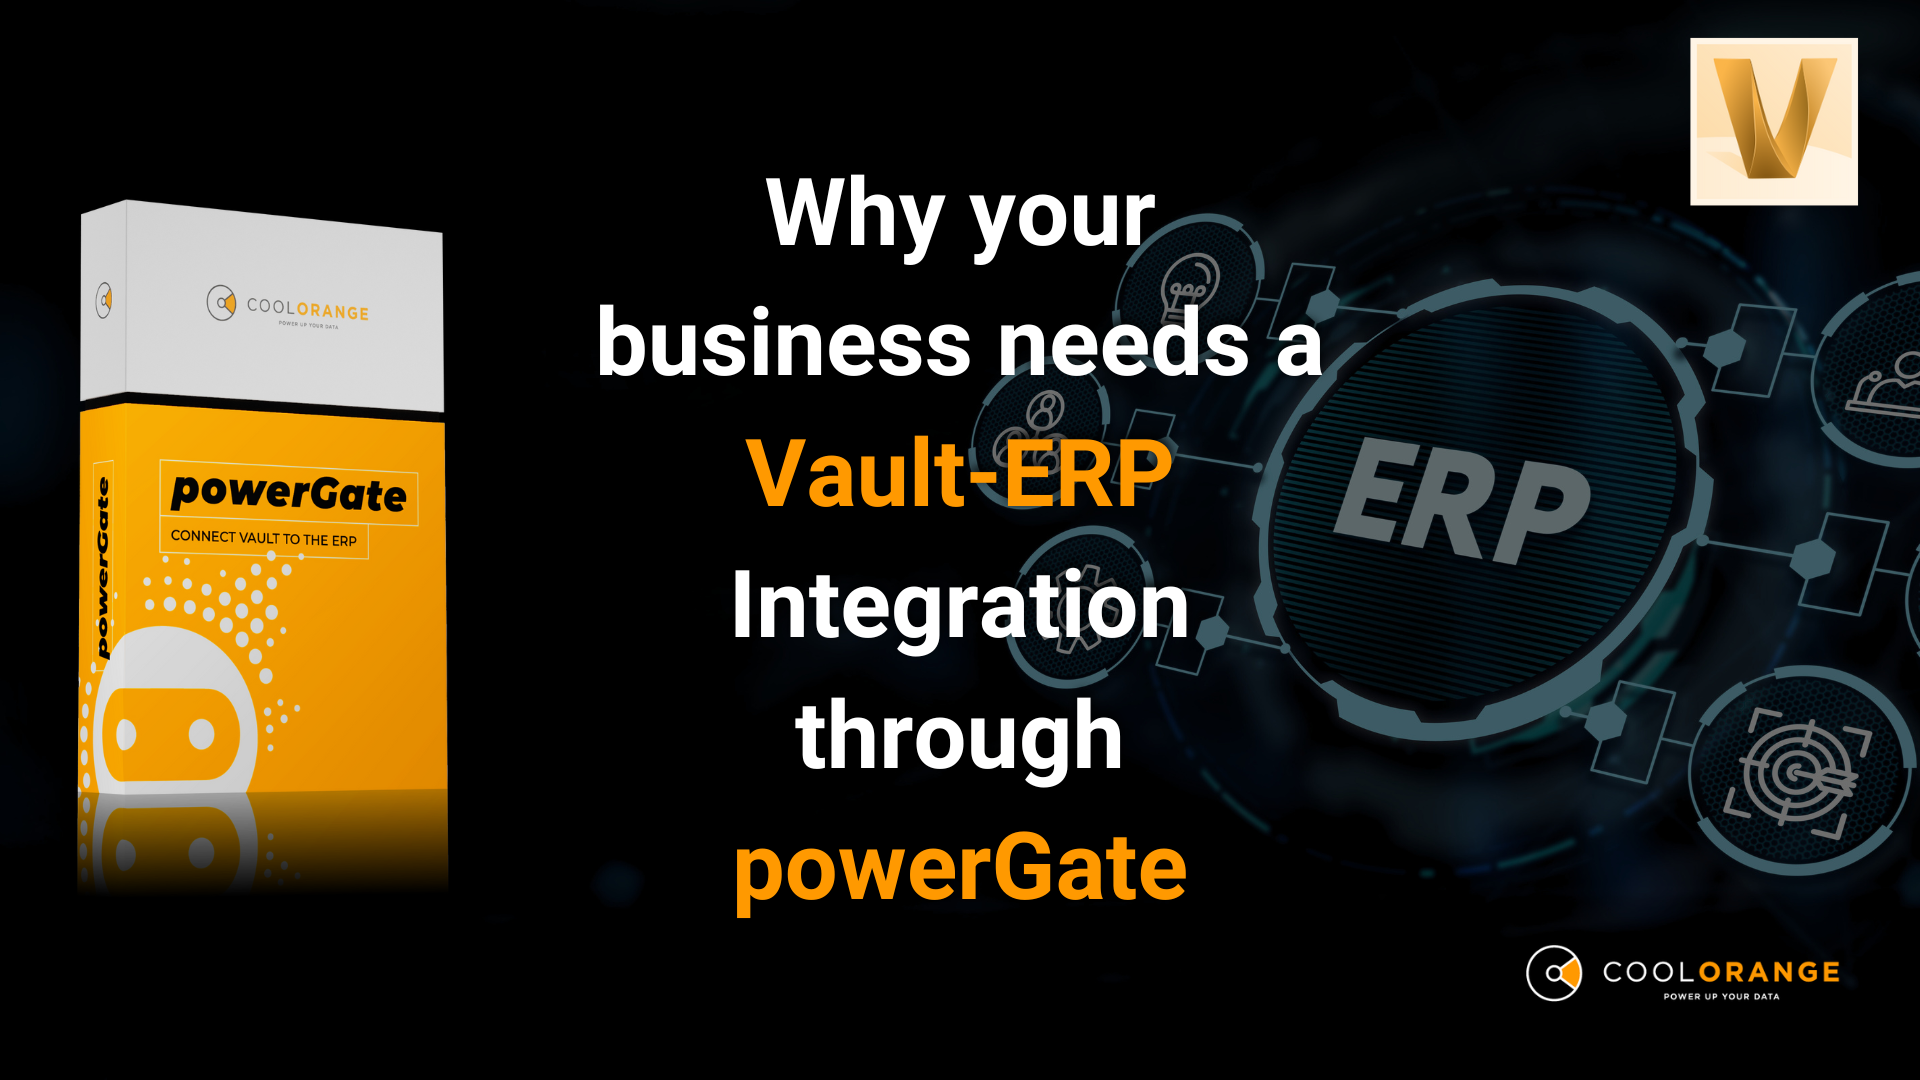 Why your business needs a Vault-ERP Integration through powerGate